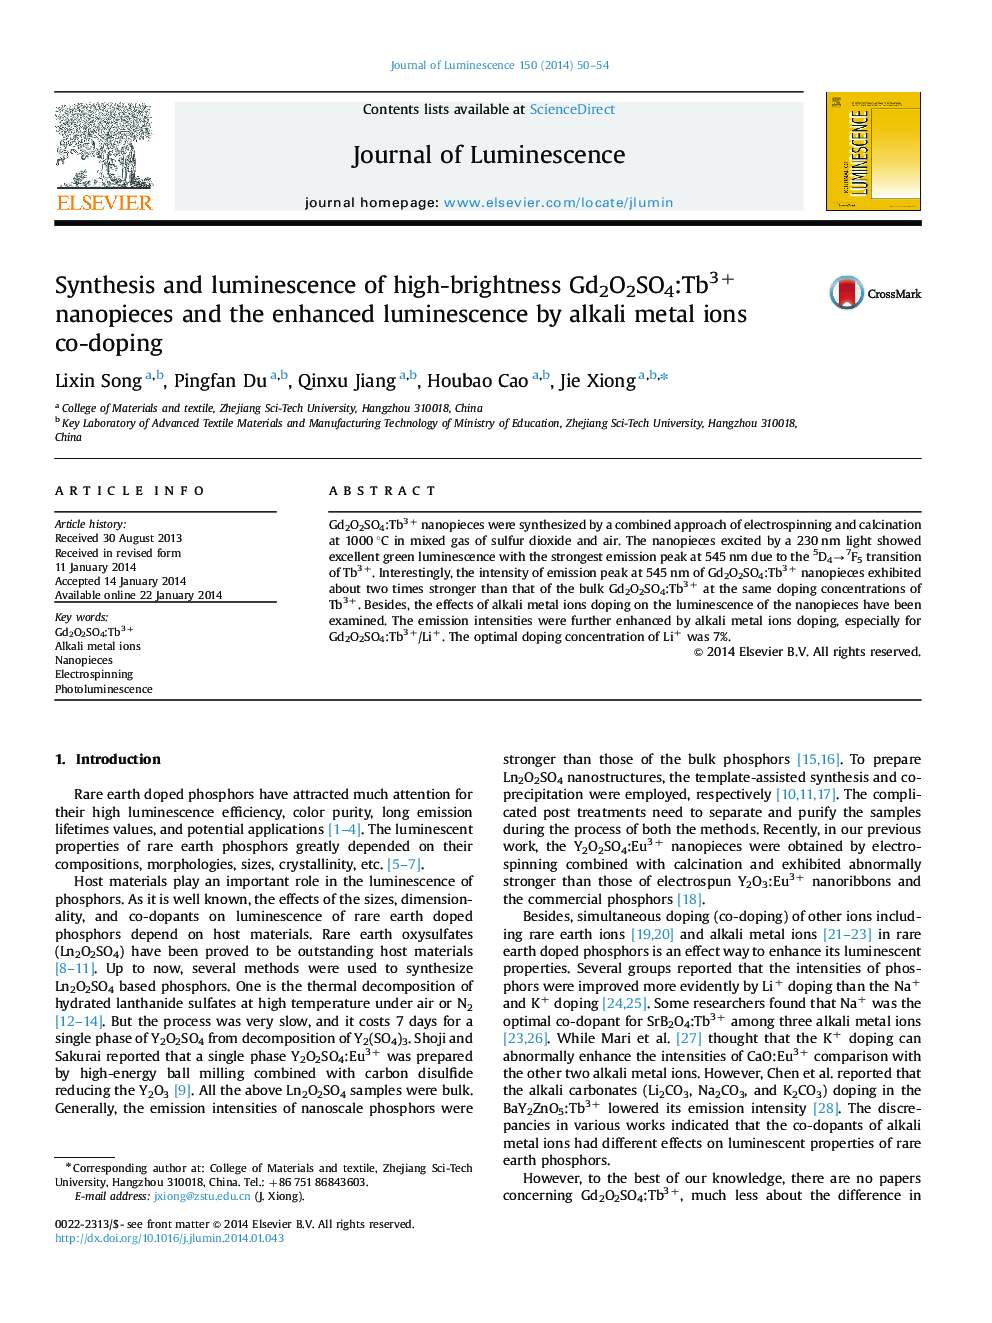 Synthesis and luminescence of high-brightness Gd2O2SO4:Tb3+ nanopieces and the enhanced luminescence by alkali metal ions co-doping